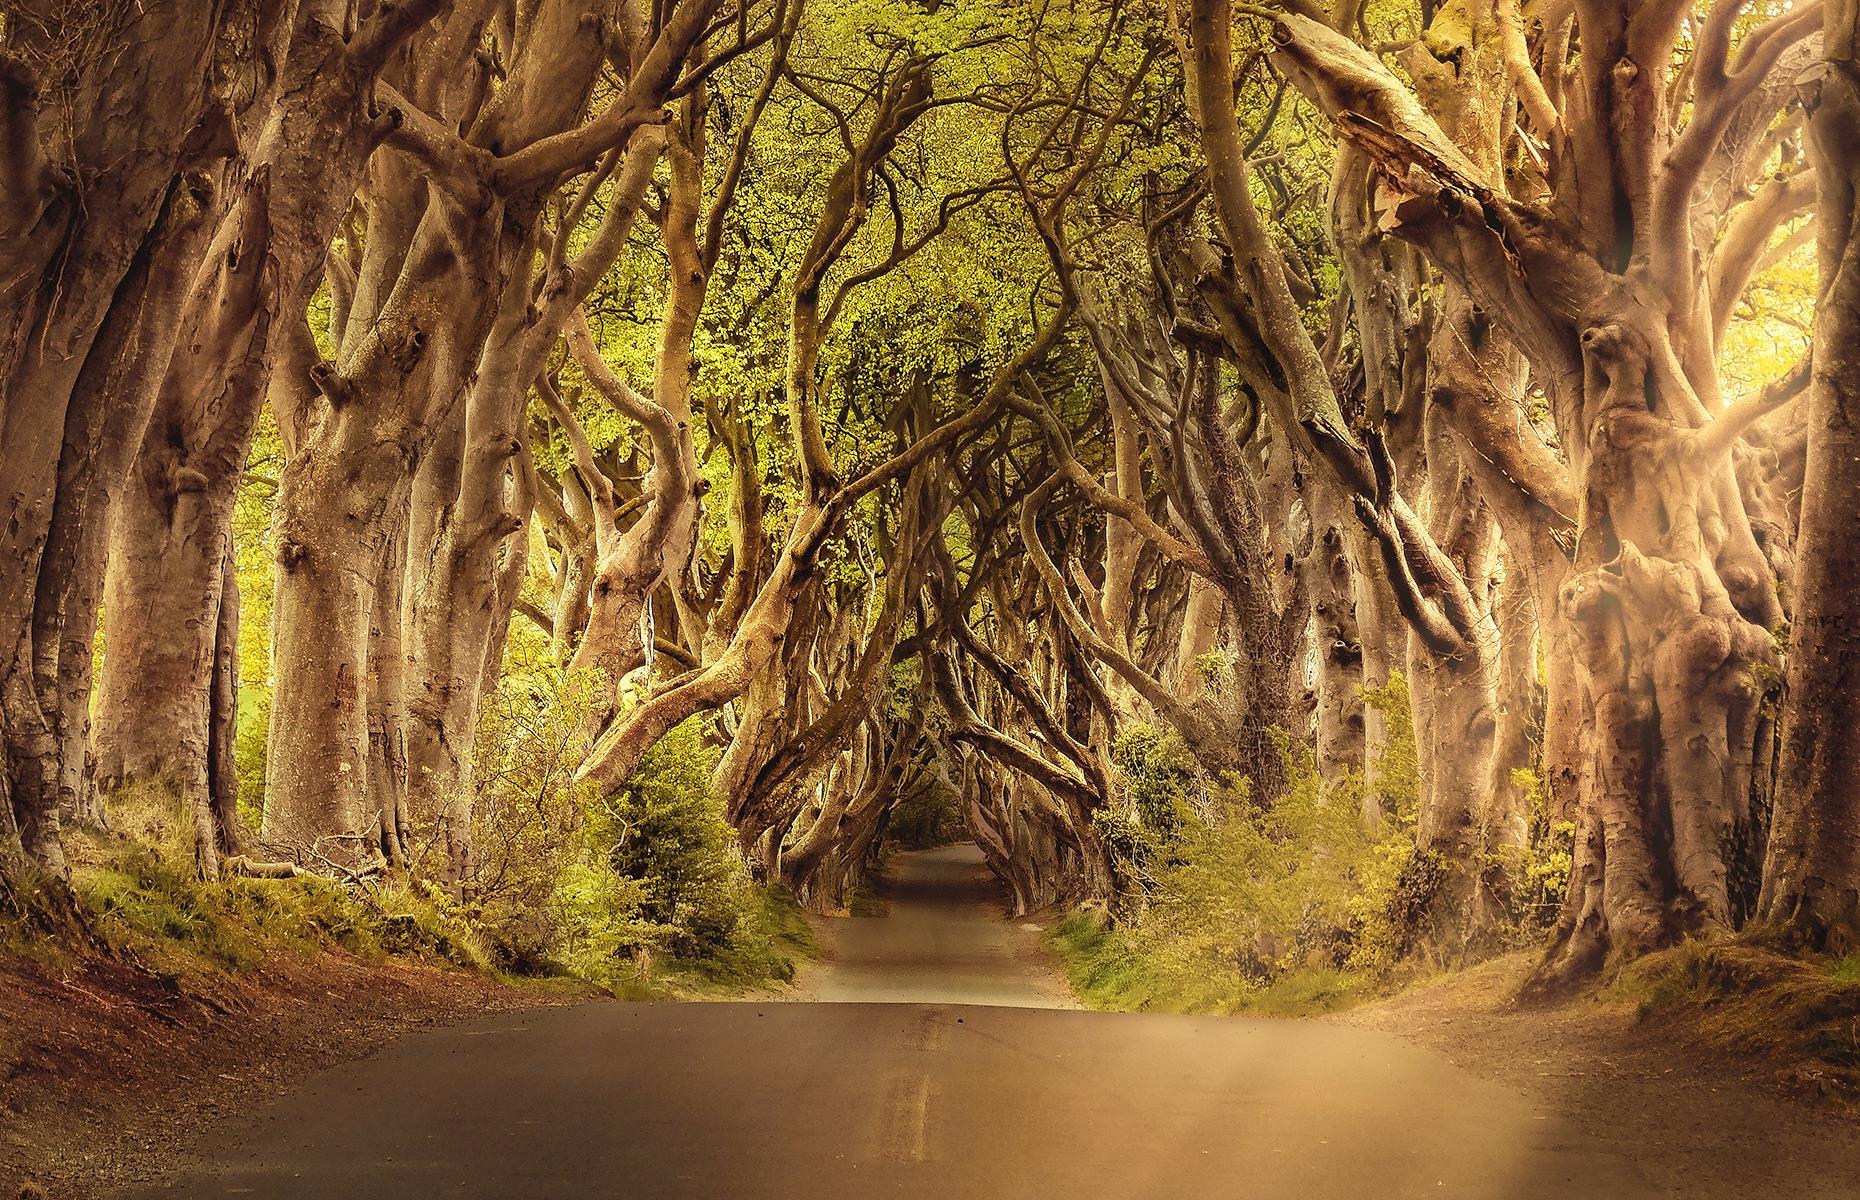 <p>Think you've seen this gnarled alleyway of trees before? Northern Ireland's Dark Hedges were made famous by fantasy TV series <em>Game of Thrones</em> and they remain a popular photo stop. They're purportedly also host to the spirit of the Grey Lady, whose ghostly image vanishes as she reaches the end of the tree tunnel. Her identity is something of a mystery, but some say it's the spirit of a housemaid who died under suspicious circumstances many years ago.</p>